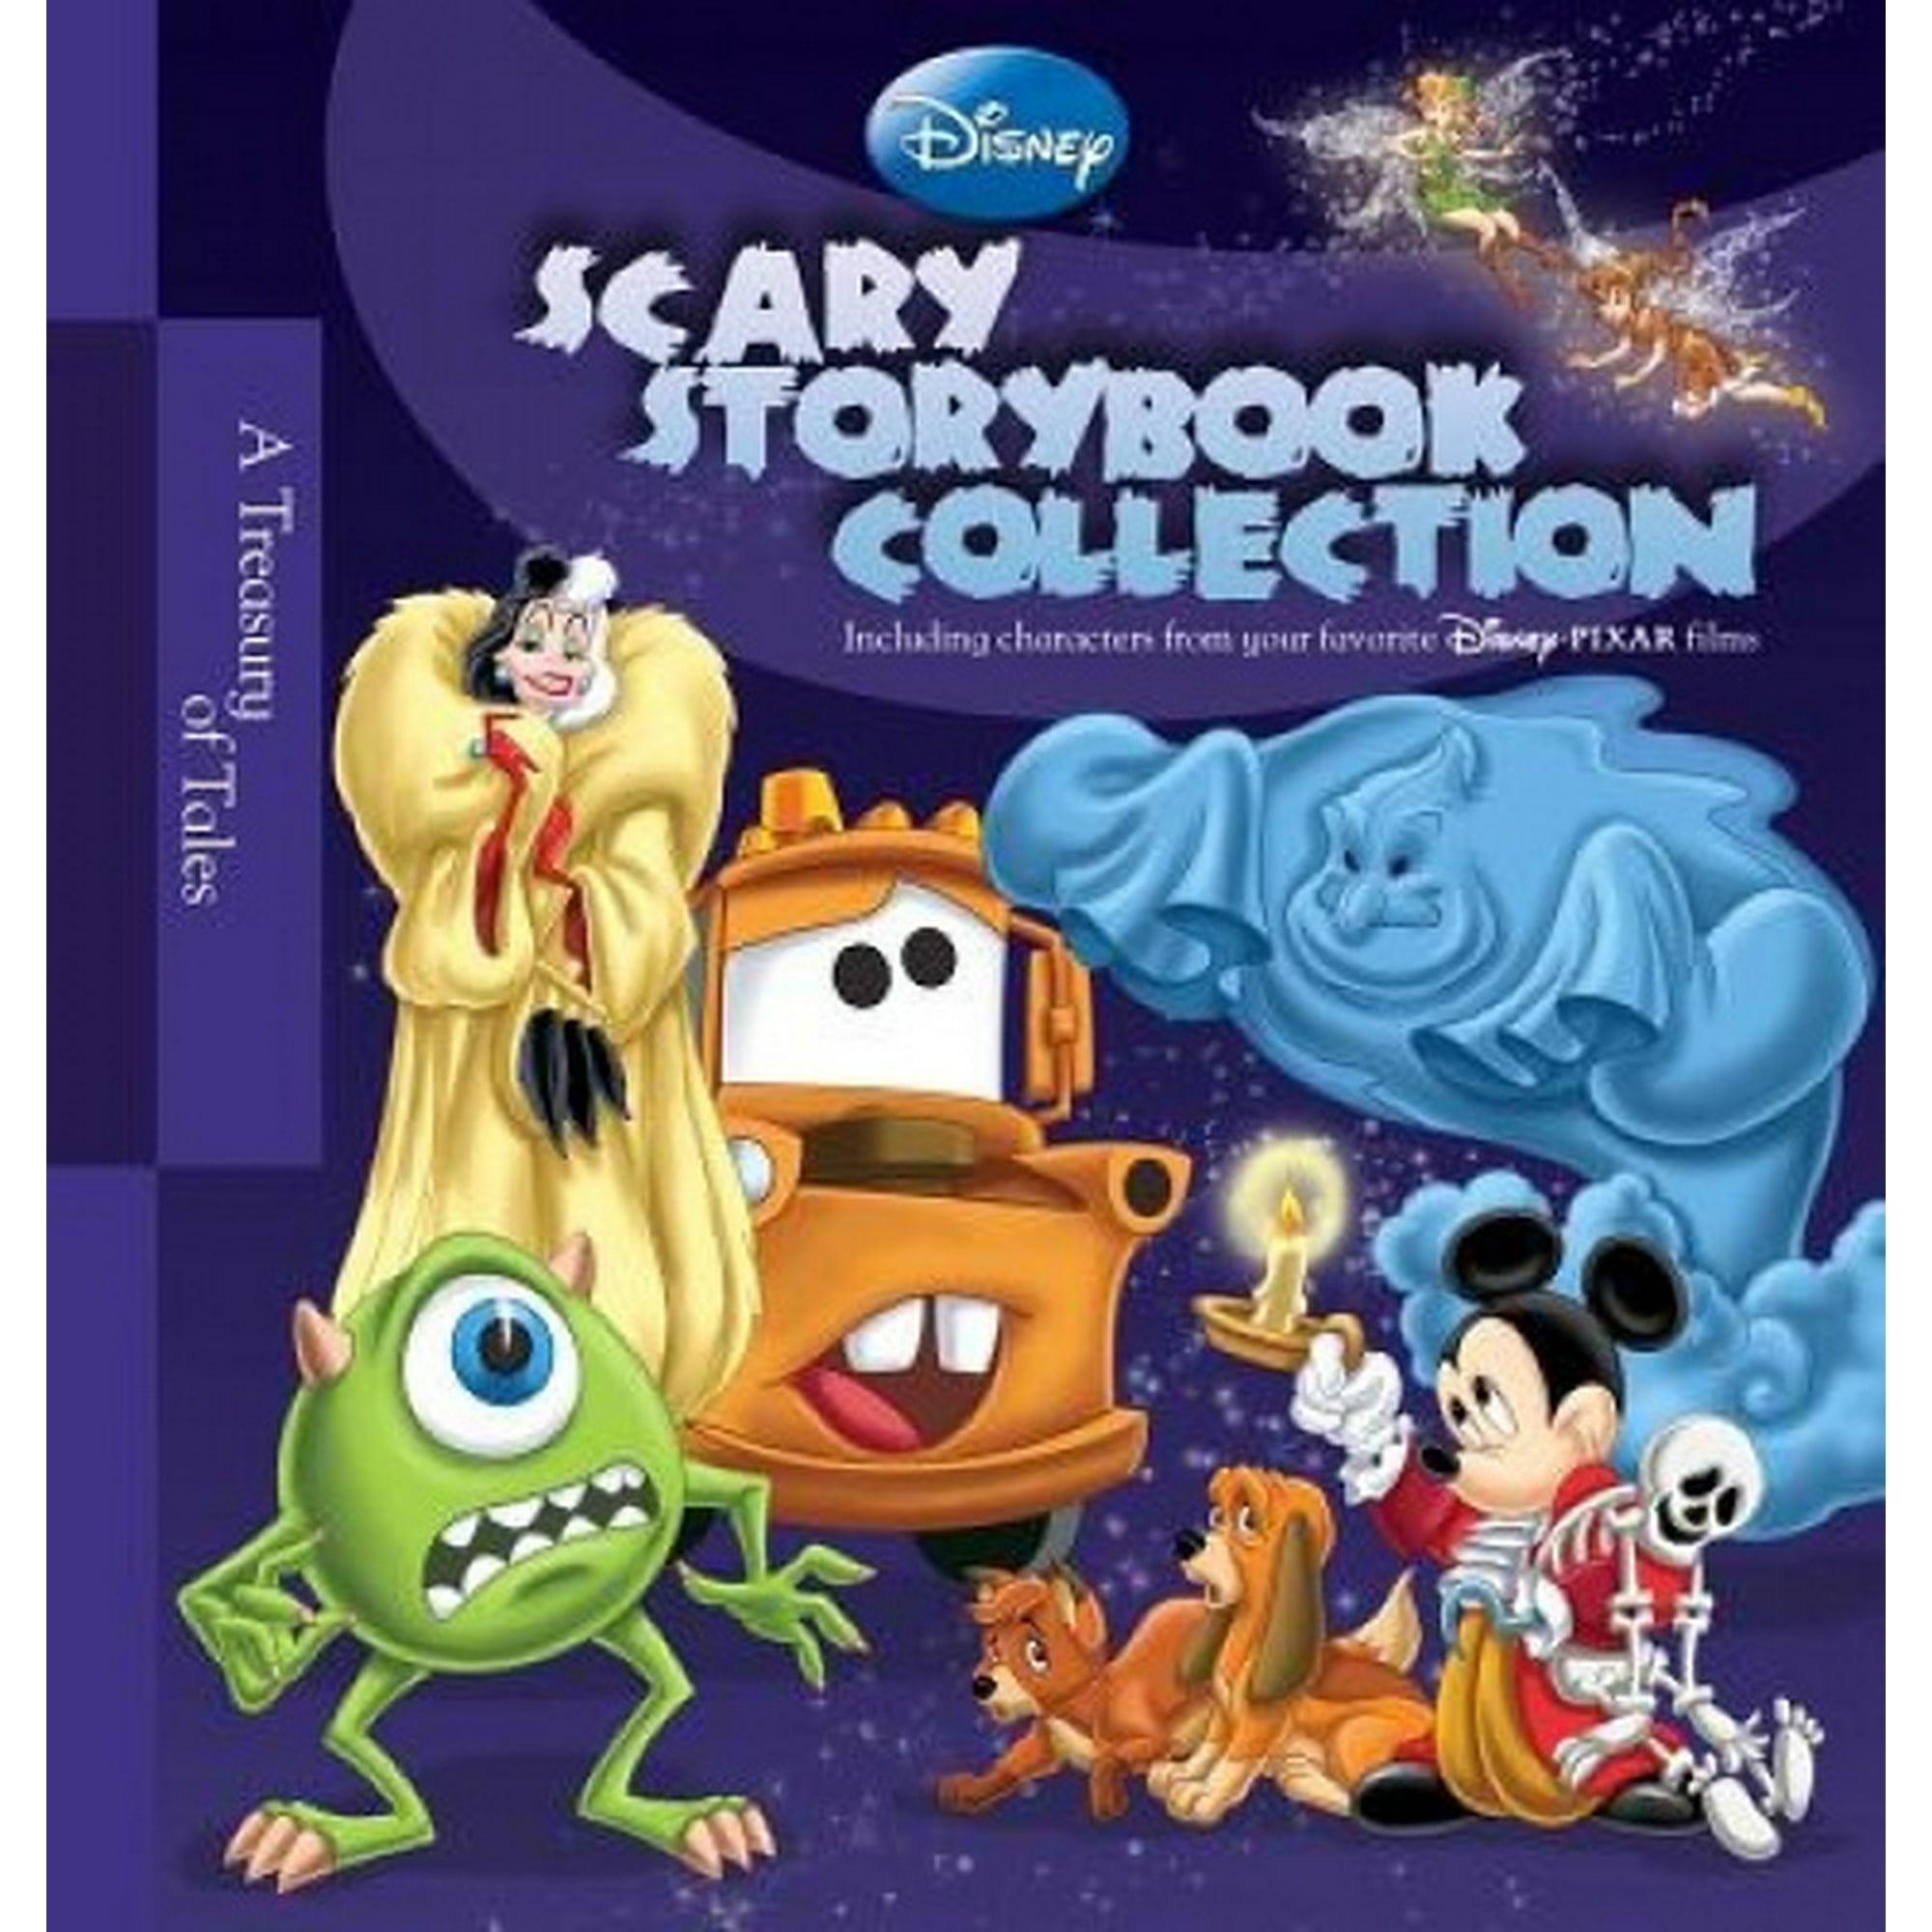 Disney Scary Storybook Collection (Disney Storybook Collections) | Walmart  Canada